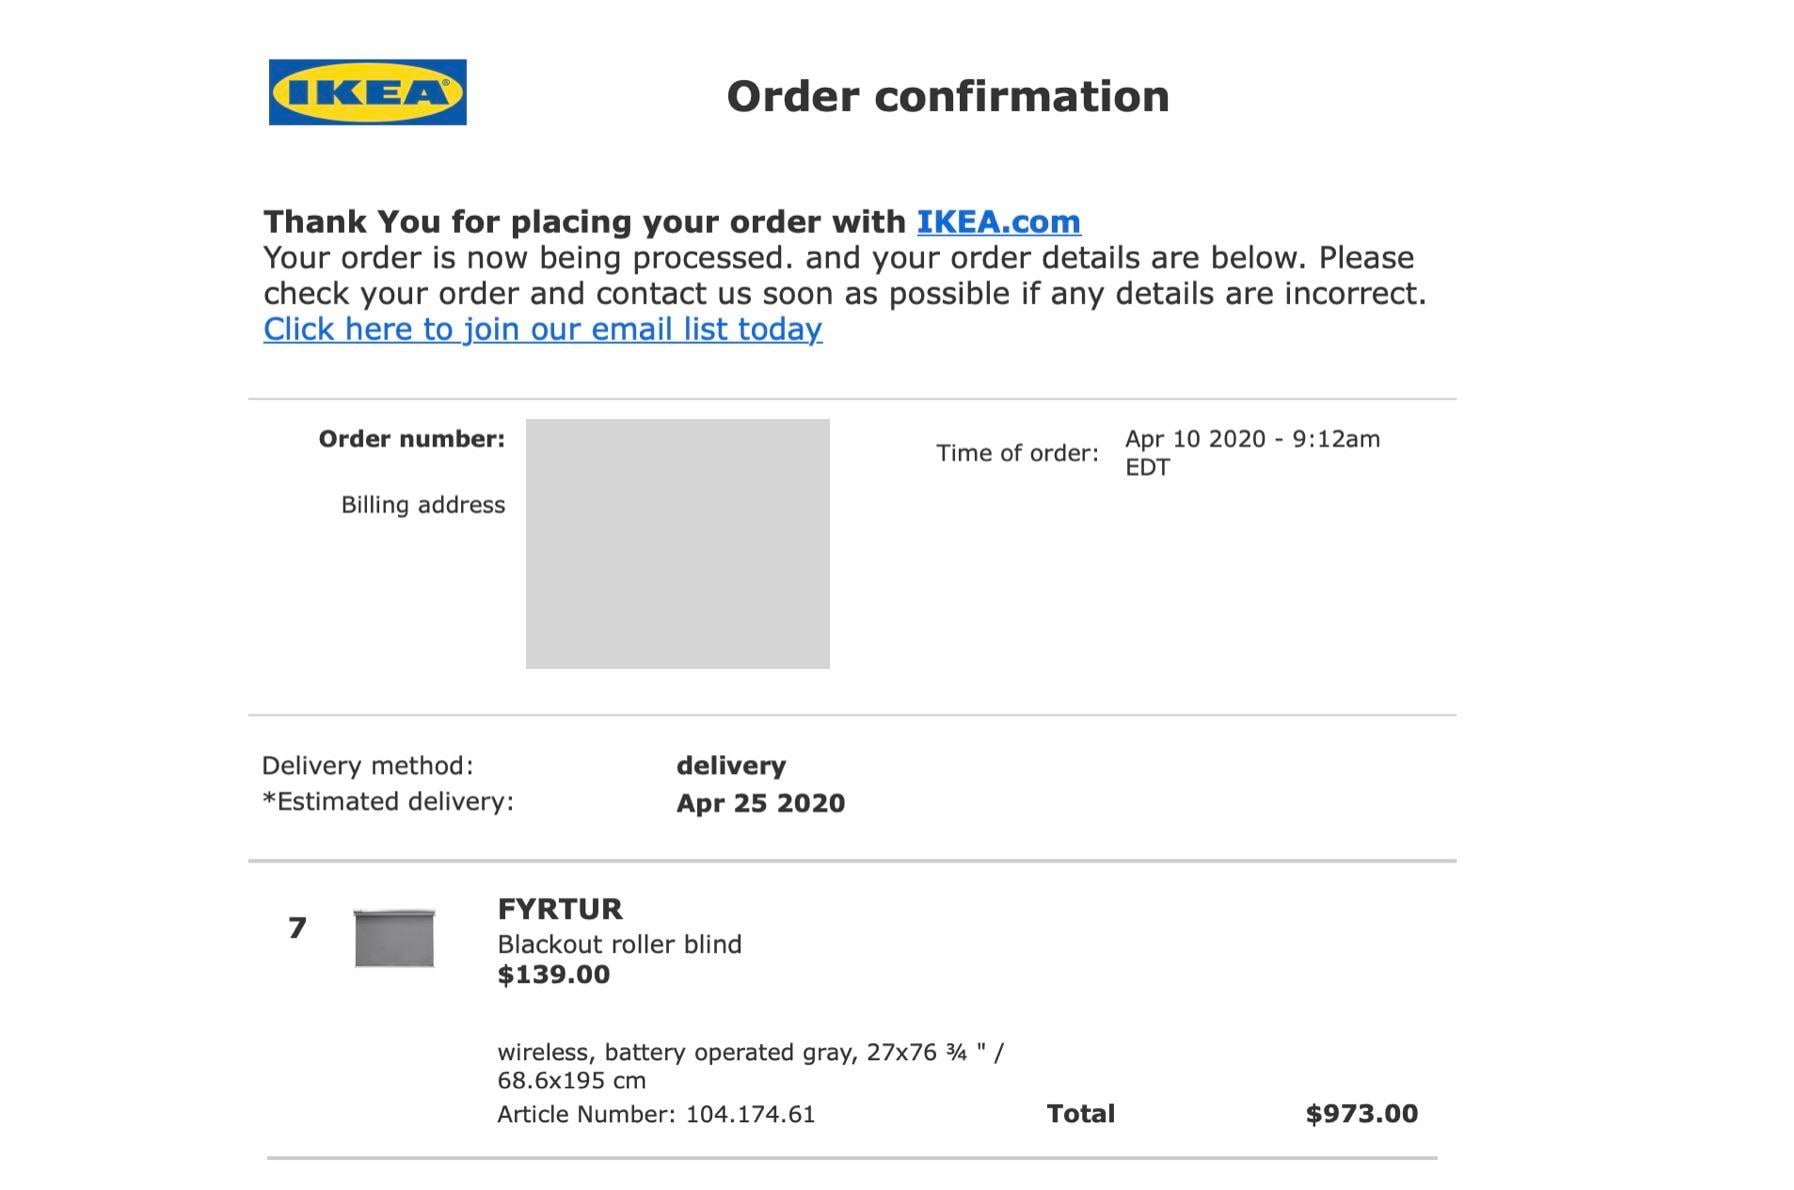 IKEA Fyrtur HomeKit blinds can be ordered online in the